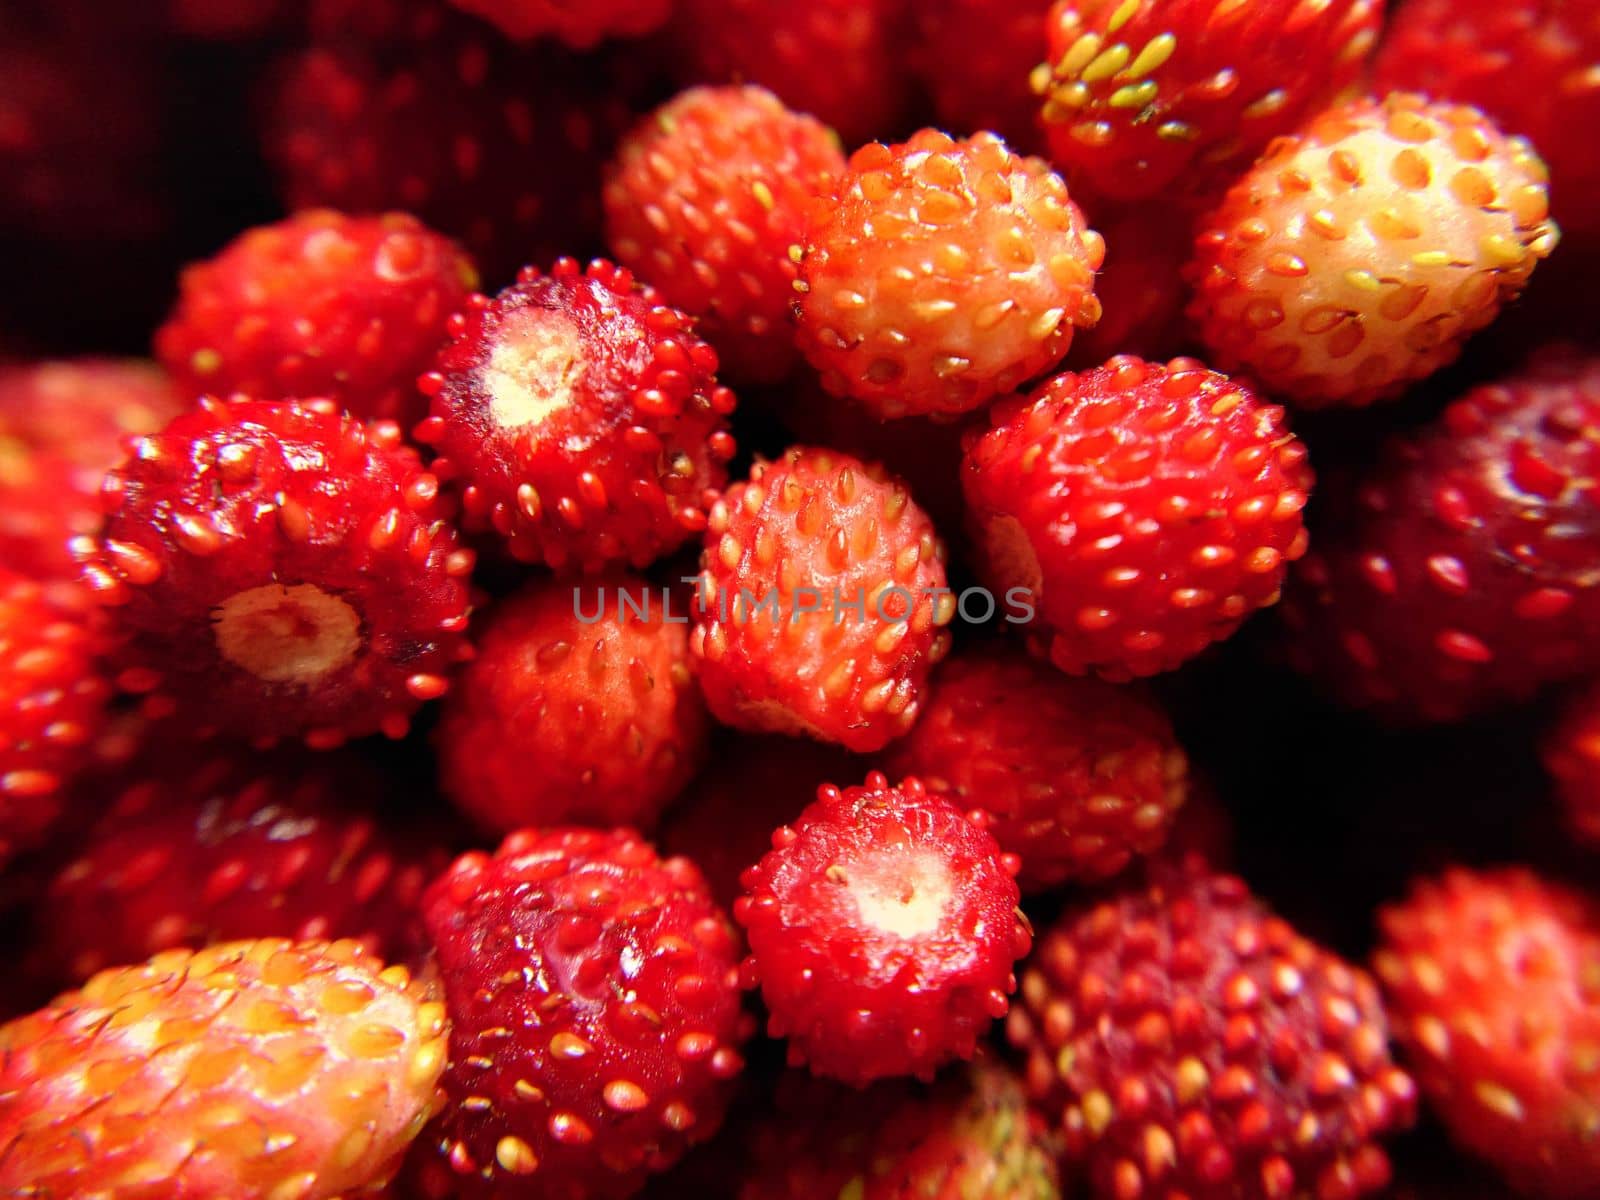 A handful of red wild strawberries selective focus by Mastak80